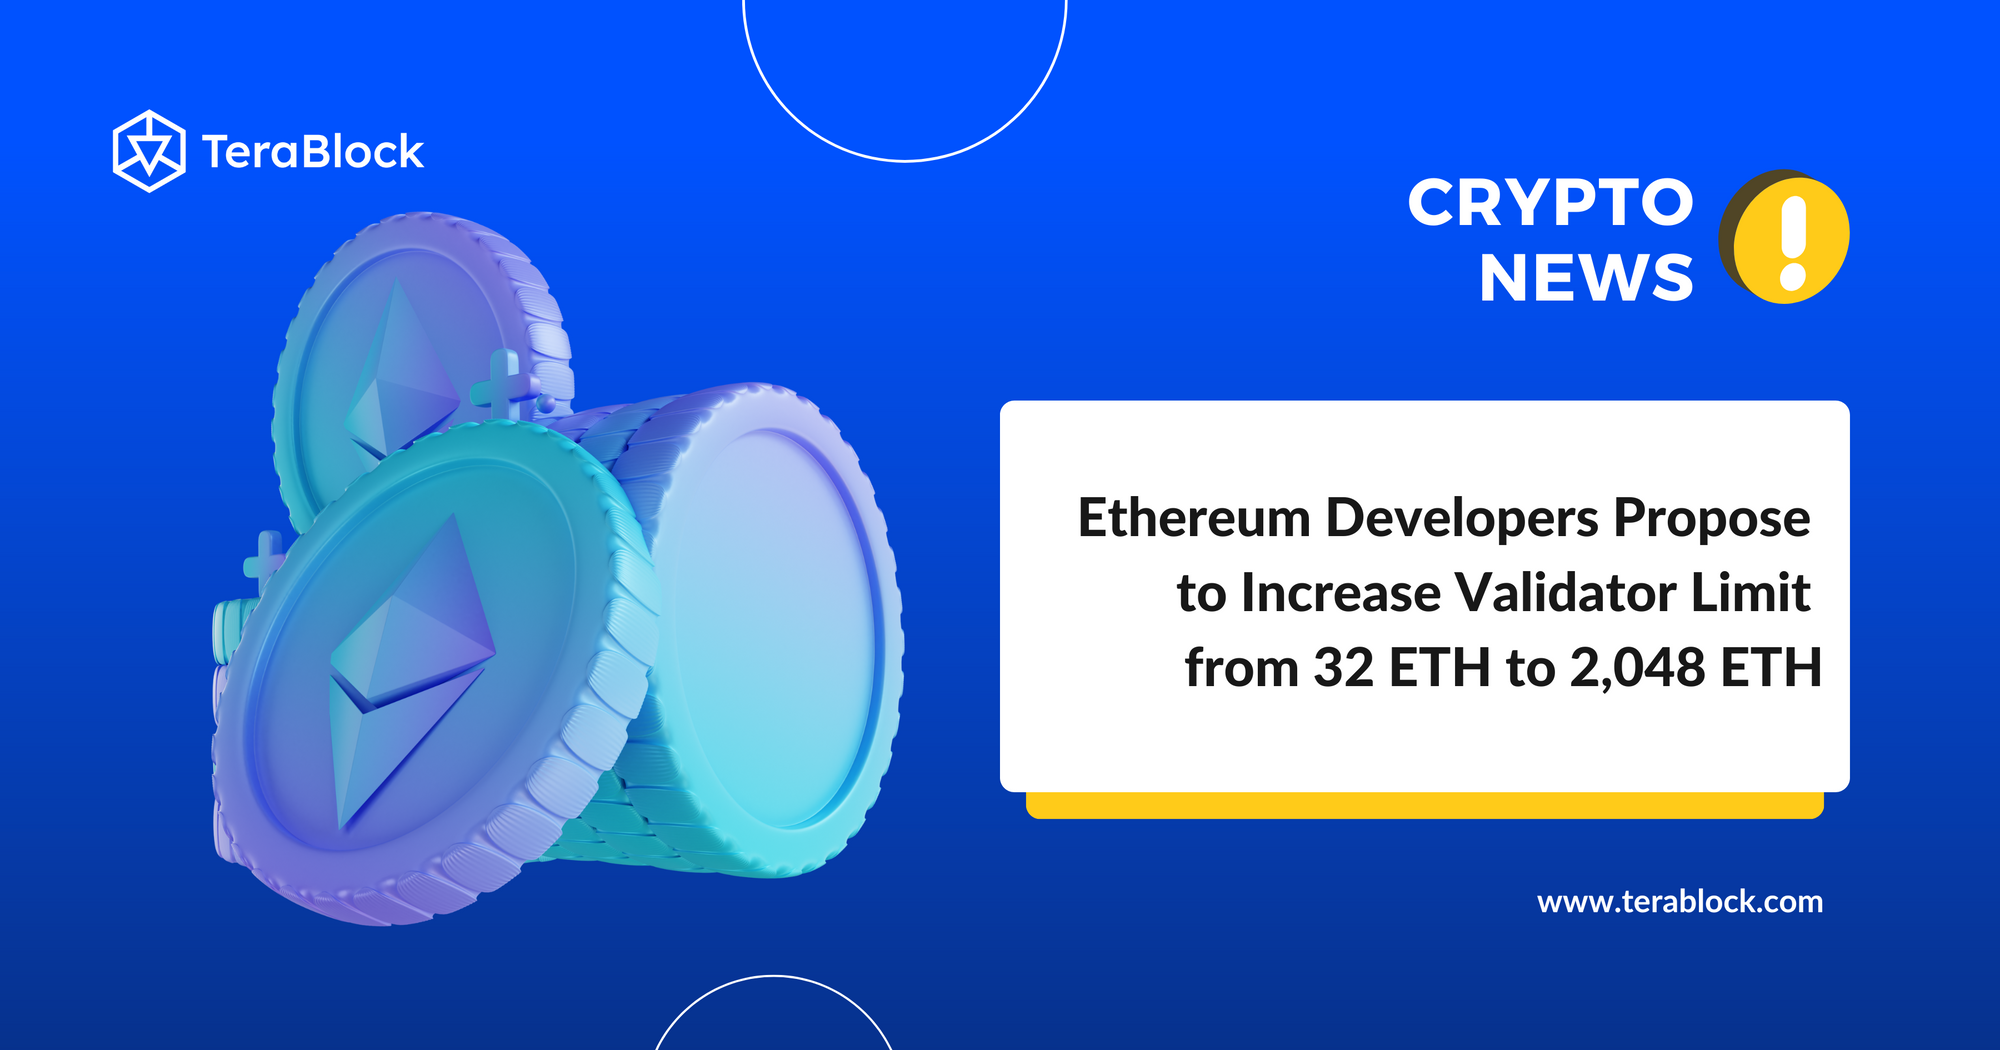 Ethereum Developers Propose a Significant Increase in Validator Limit from 32 Ether to 2,048 Ether